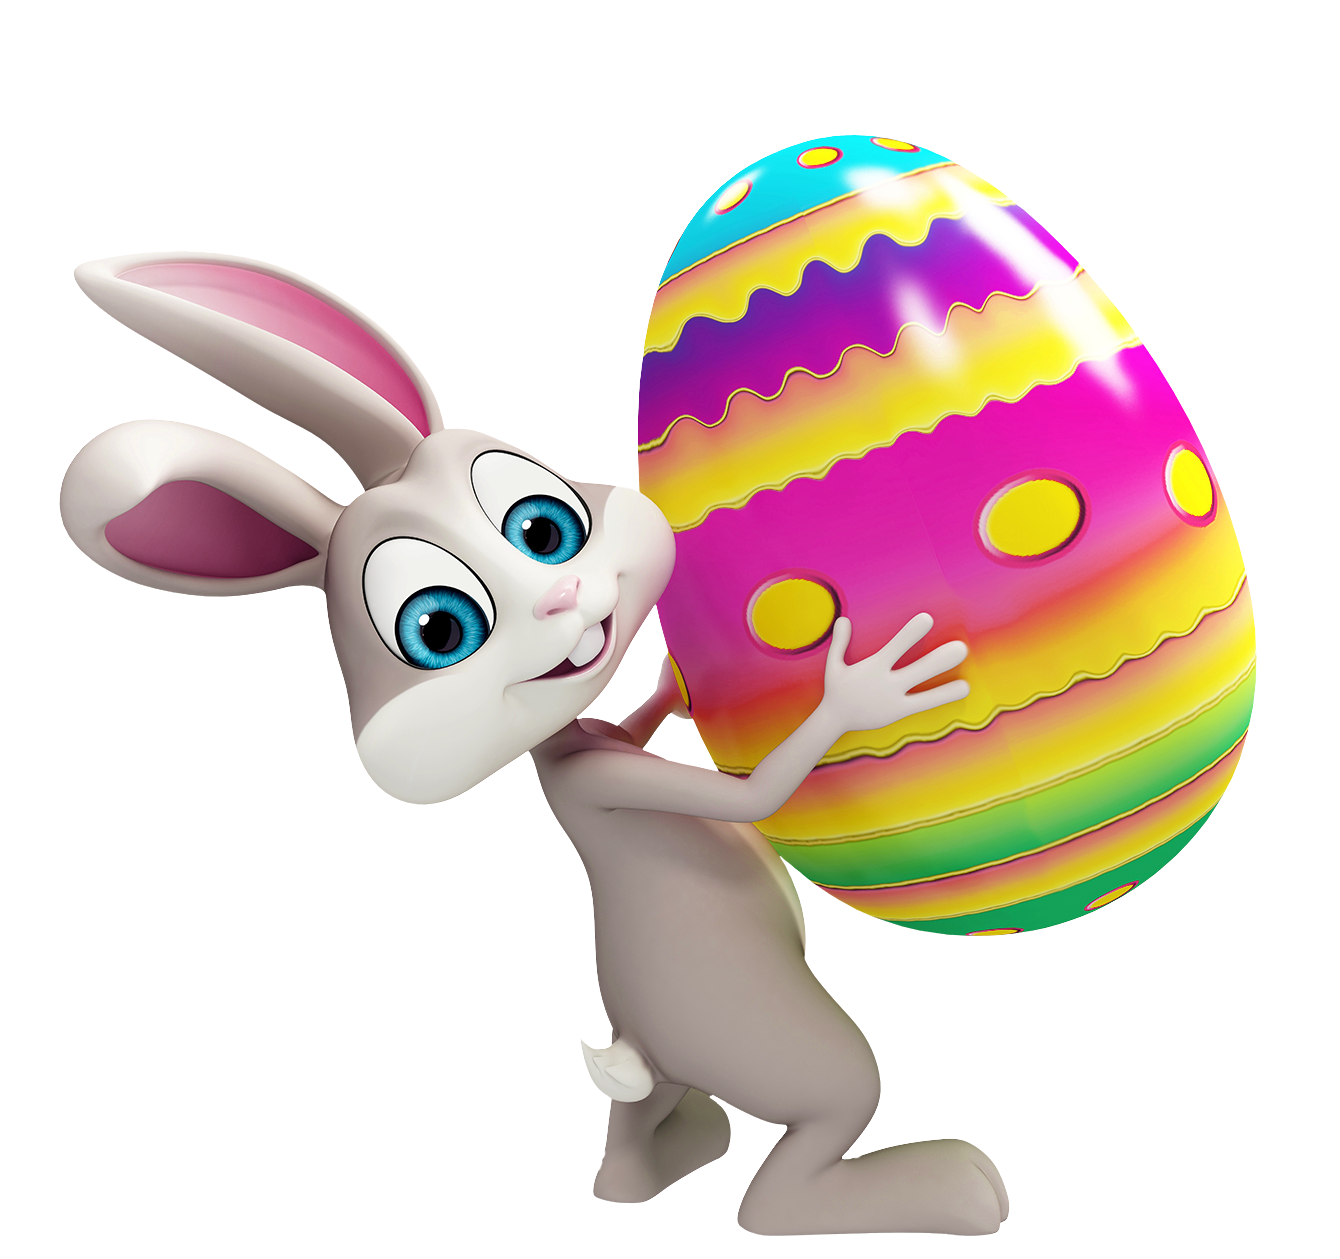 Easter Bunny with Colorful Egg Transparent PNG Clipart​ | Gallery Yopriceville - High-Quality Free Images and Transparent PNG Clipart